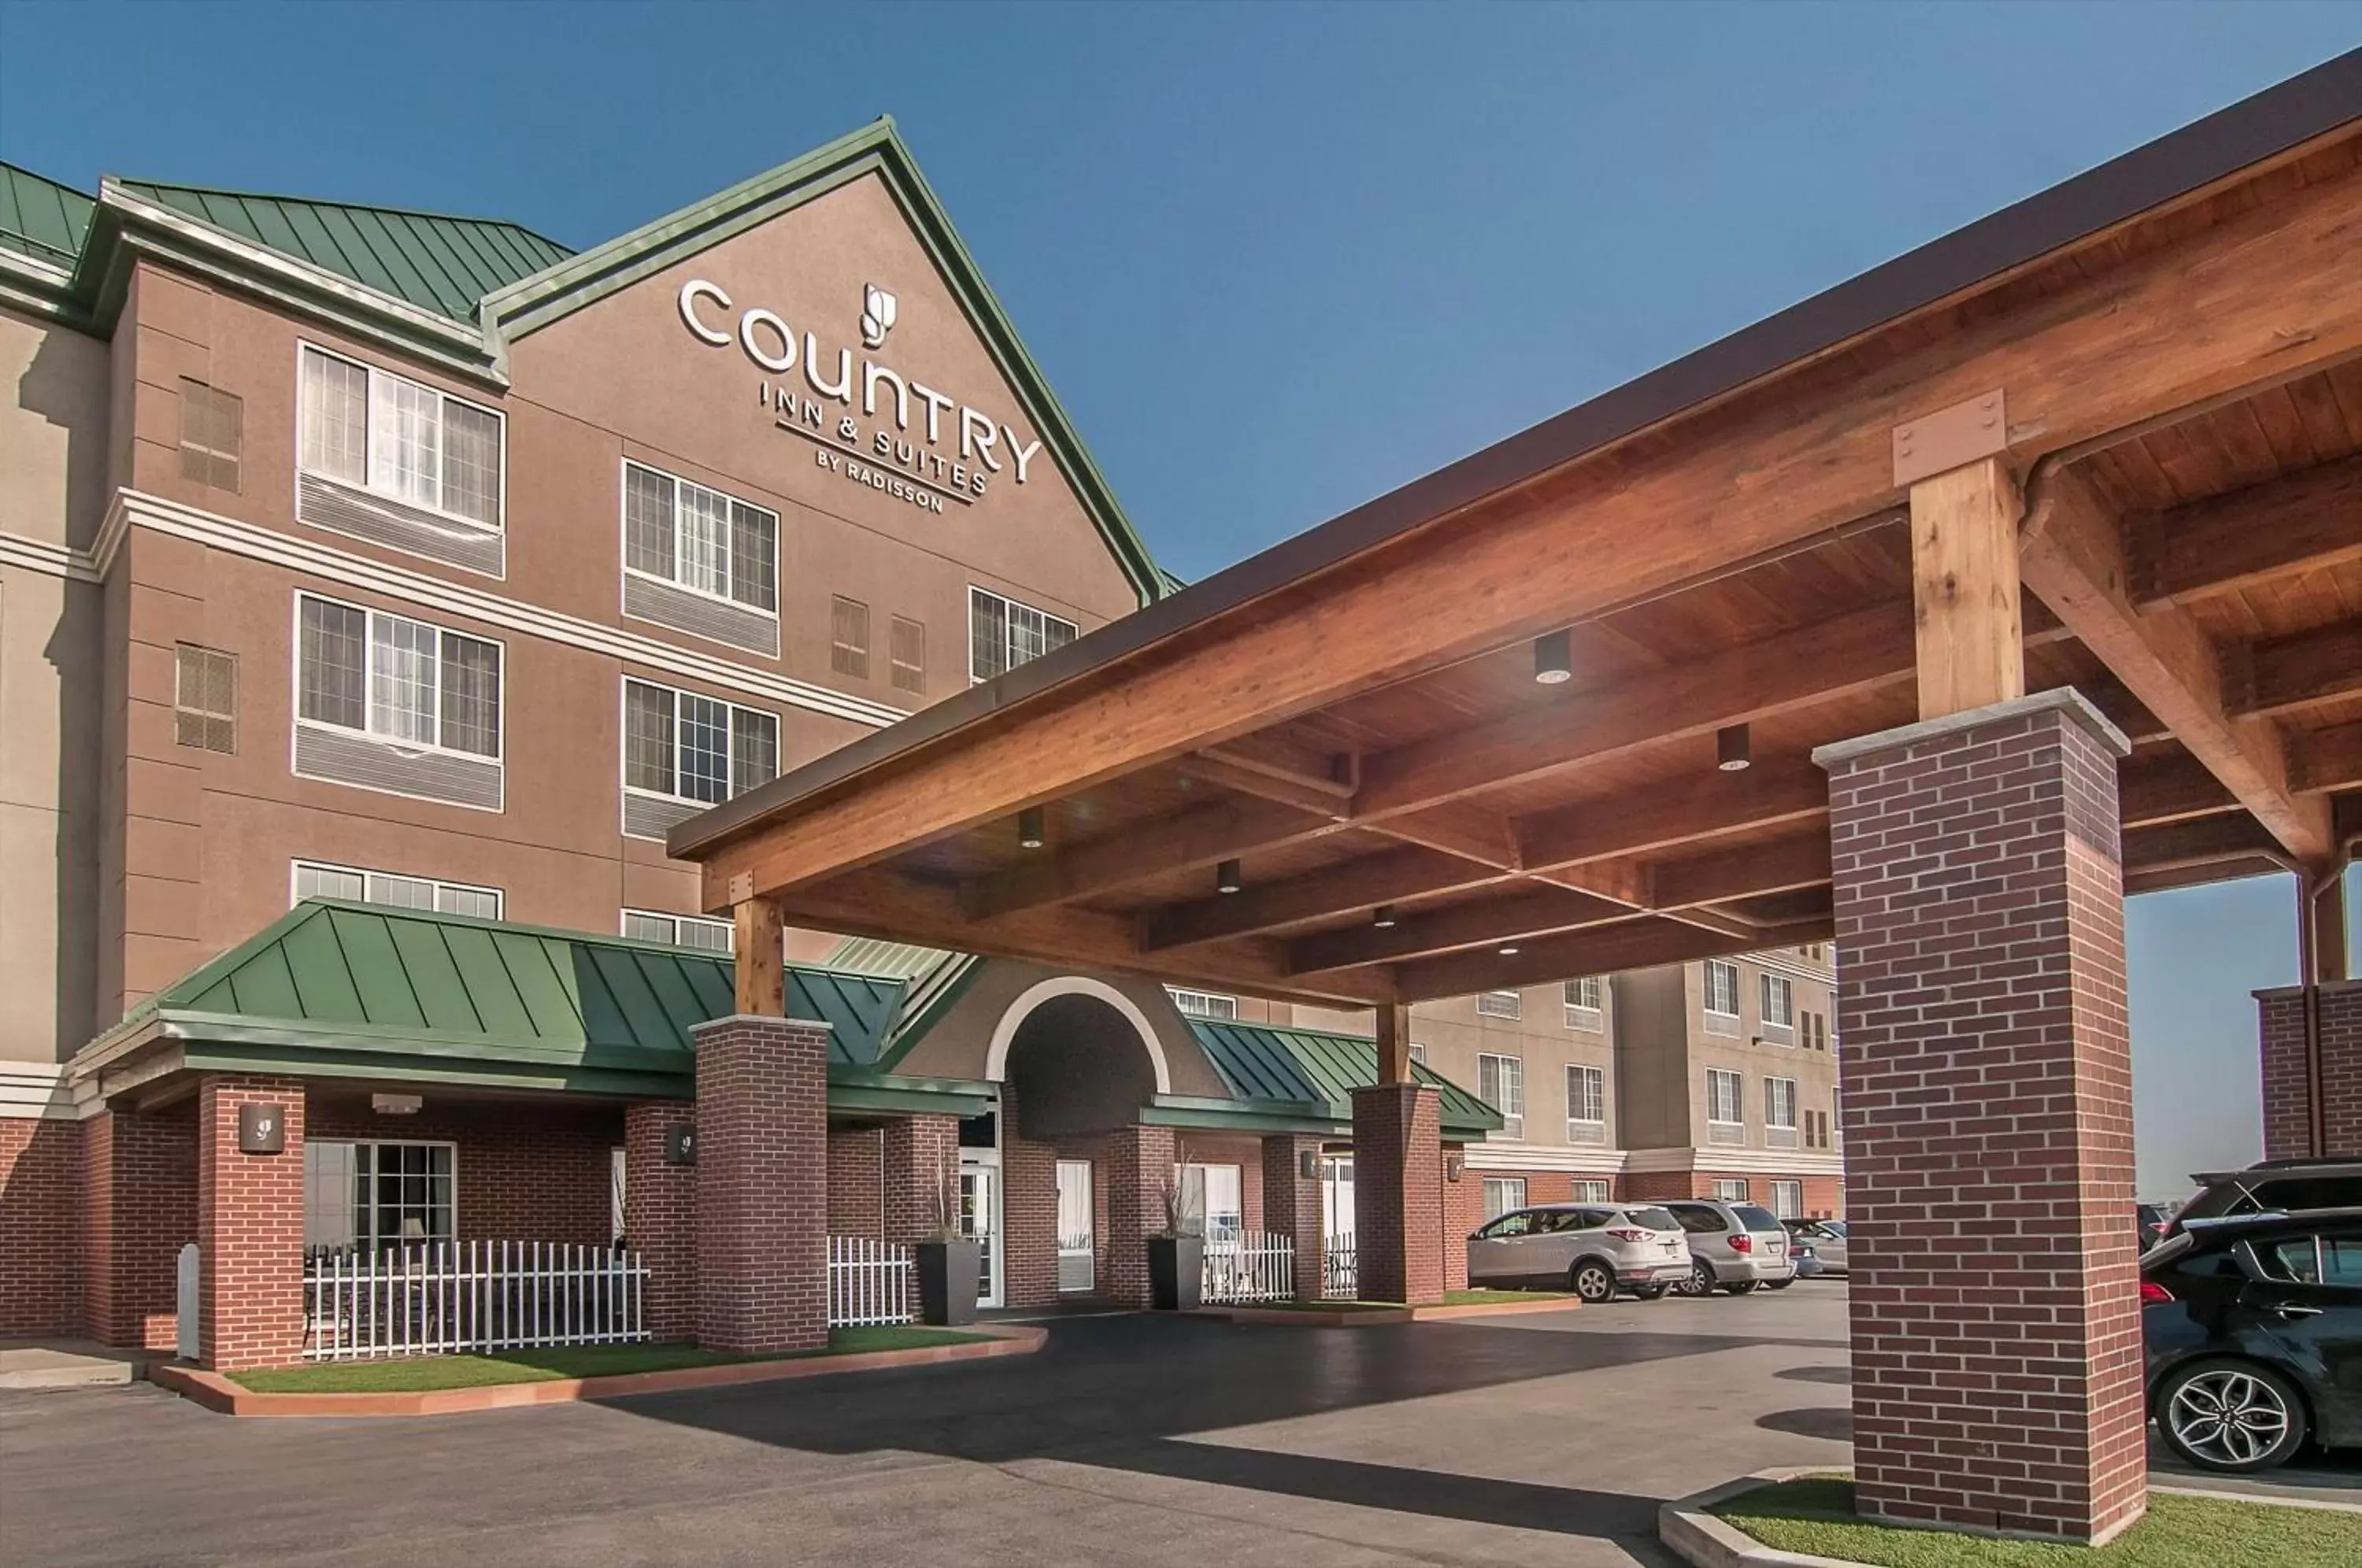 Property building in Country Inn & Suites by Radisson, Rapid City, SD